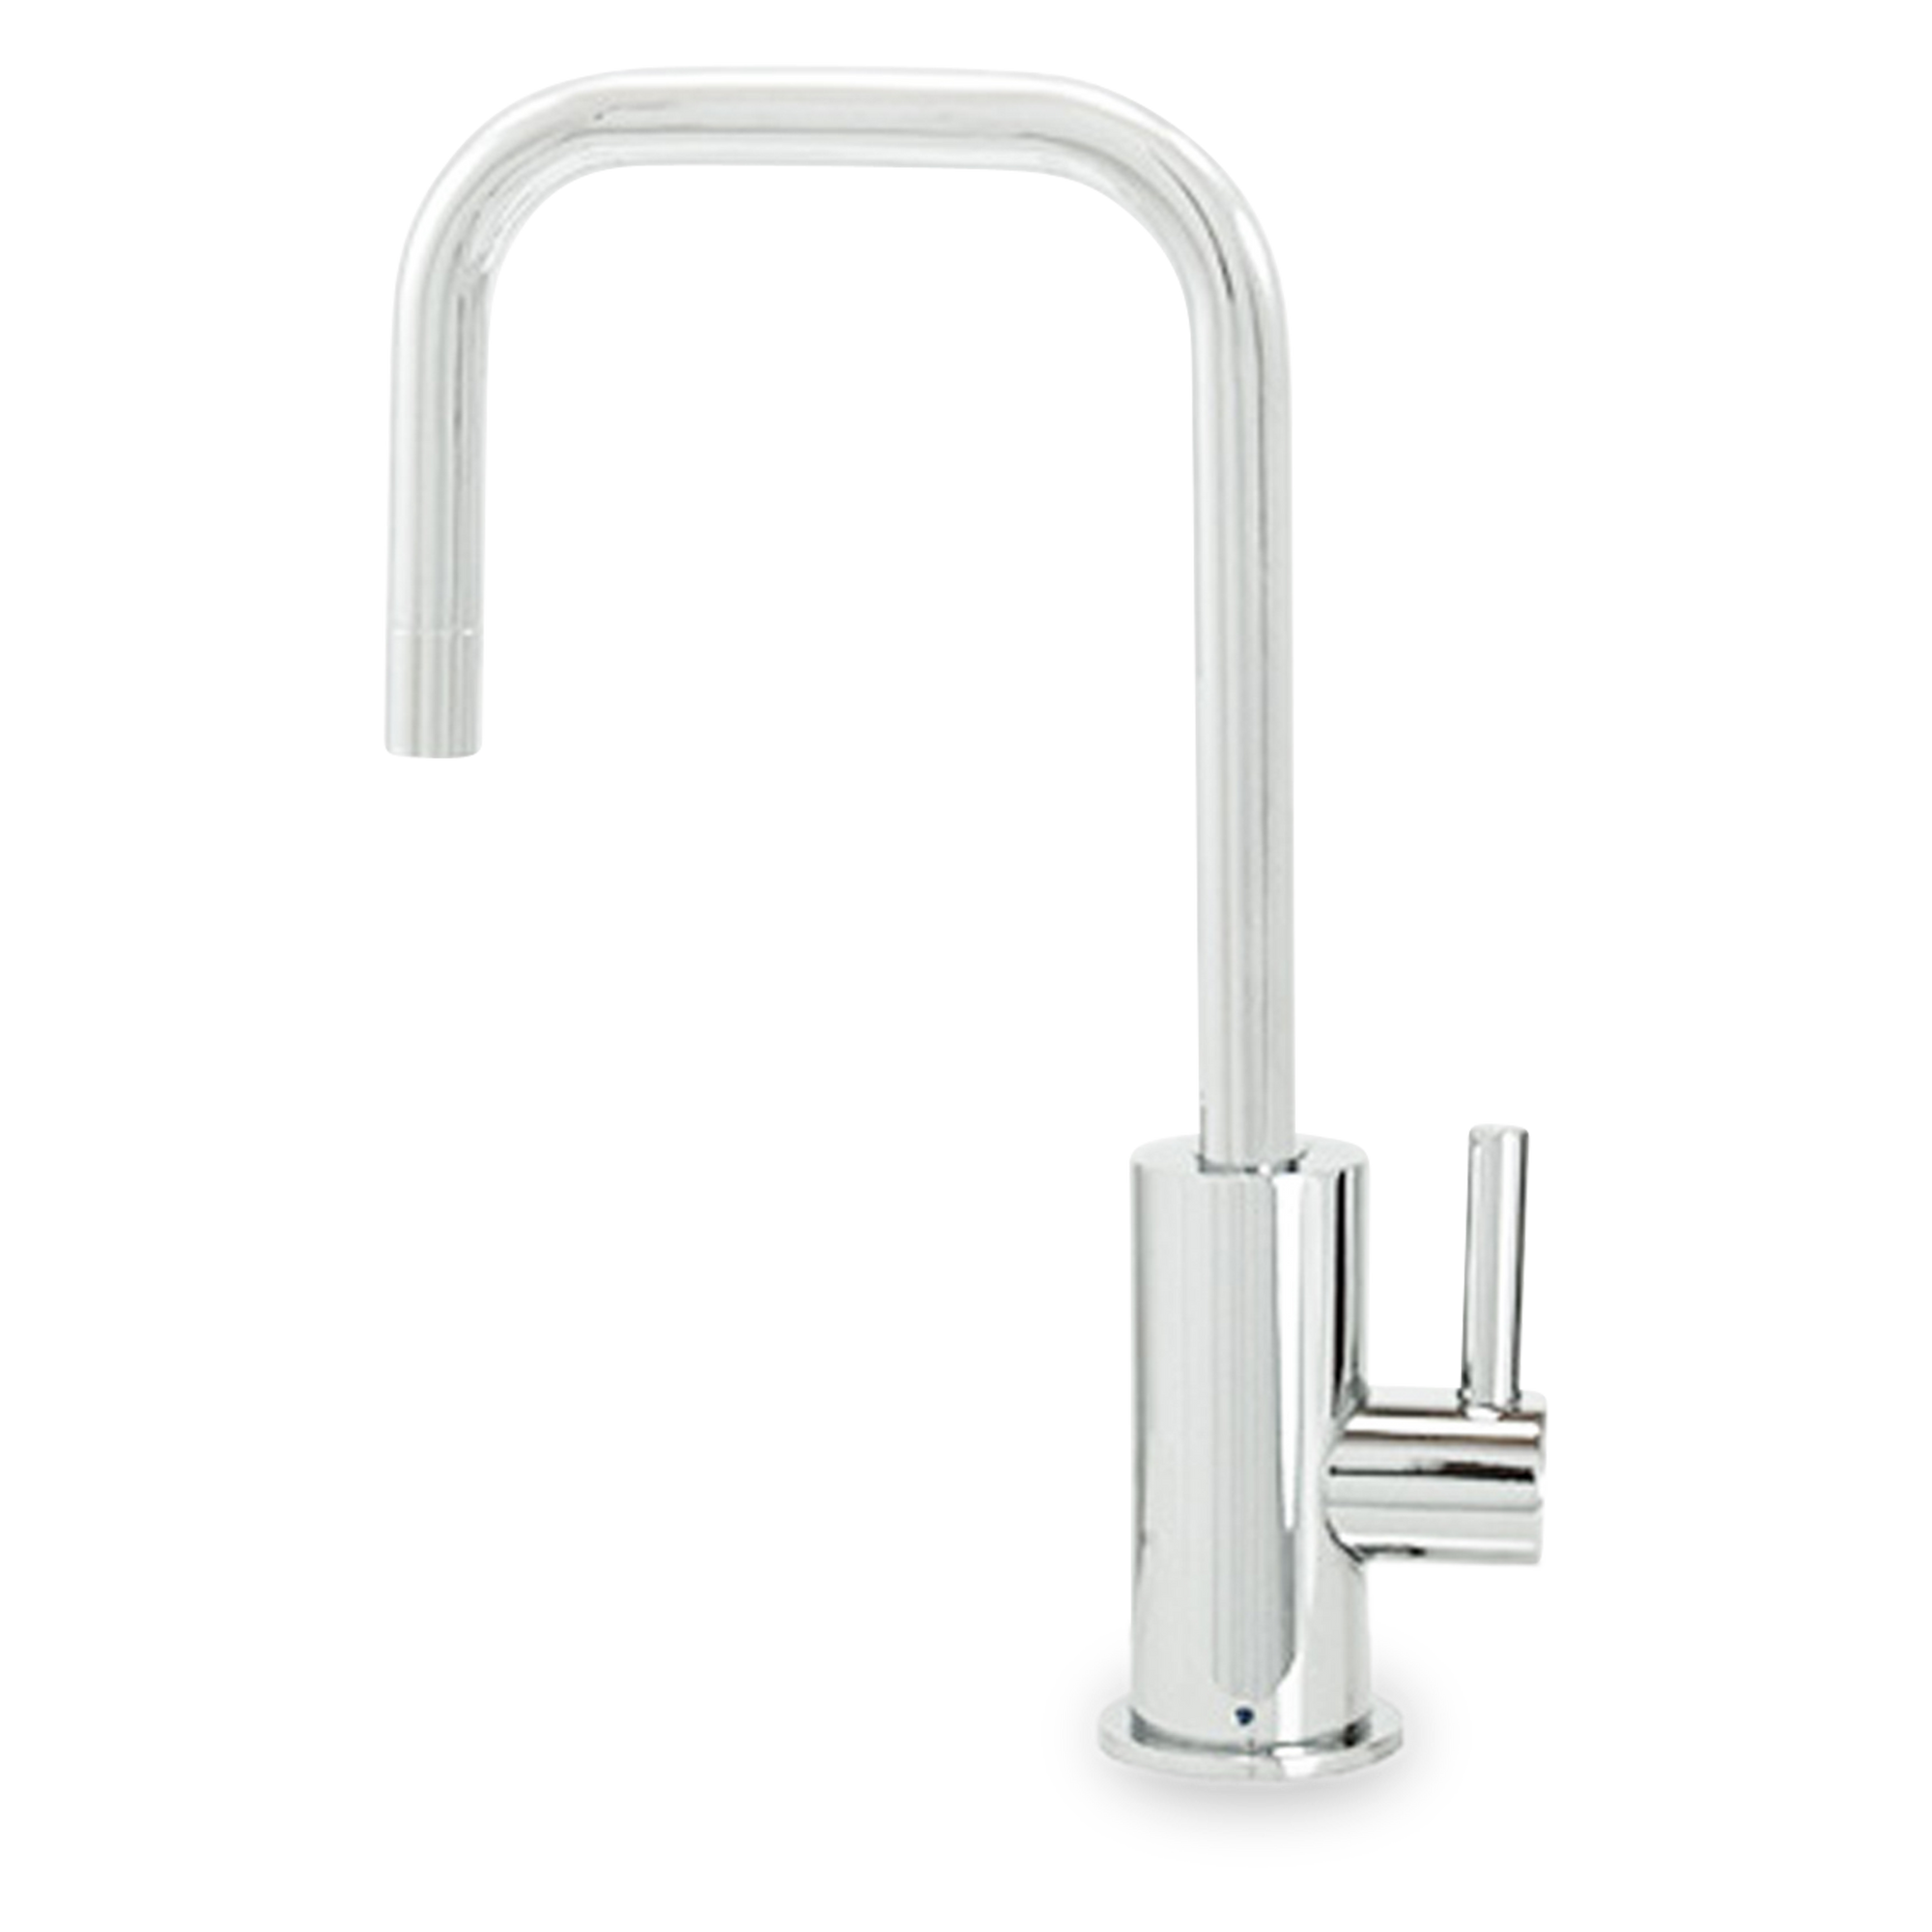 The Linea D Filter Tap uses 1/4 Turn Ceramic Cartridge and is constructed with lead free brass.